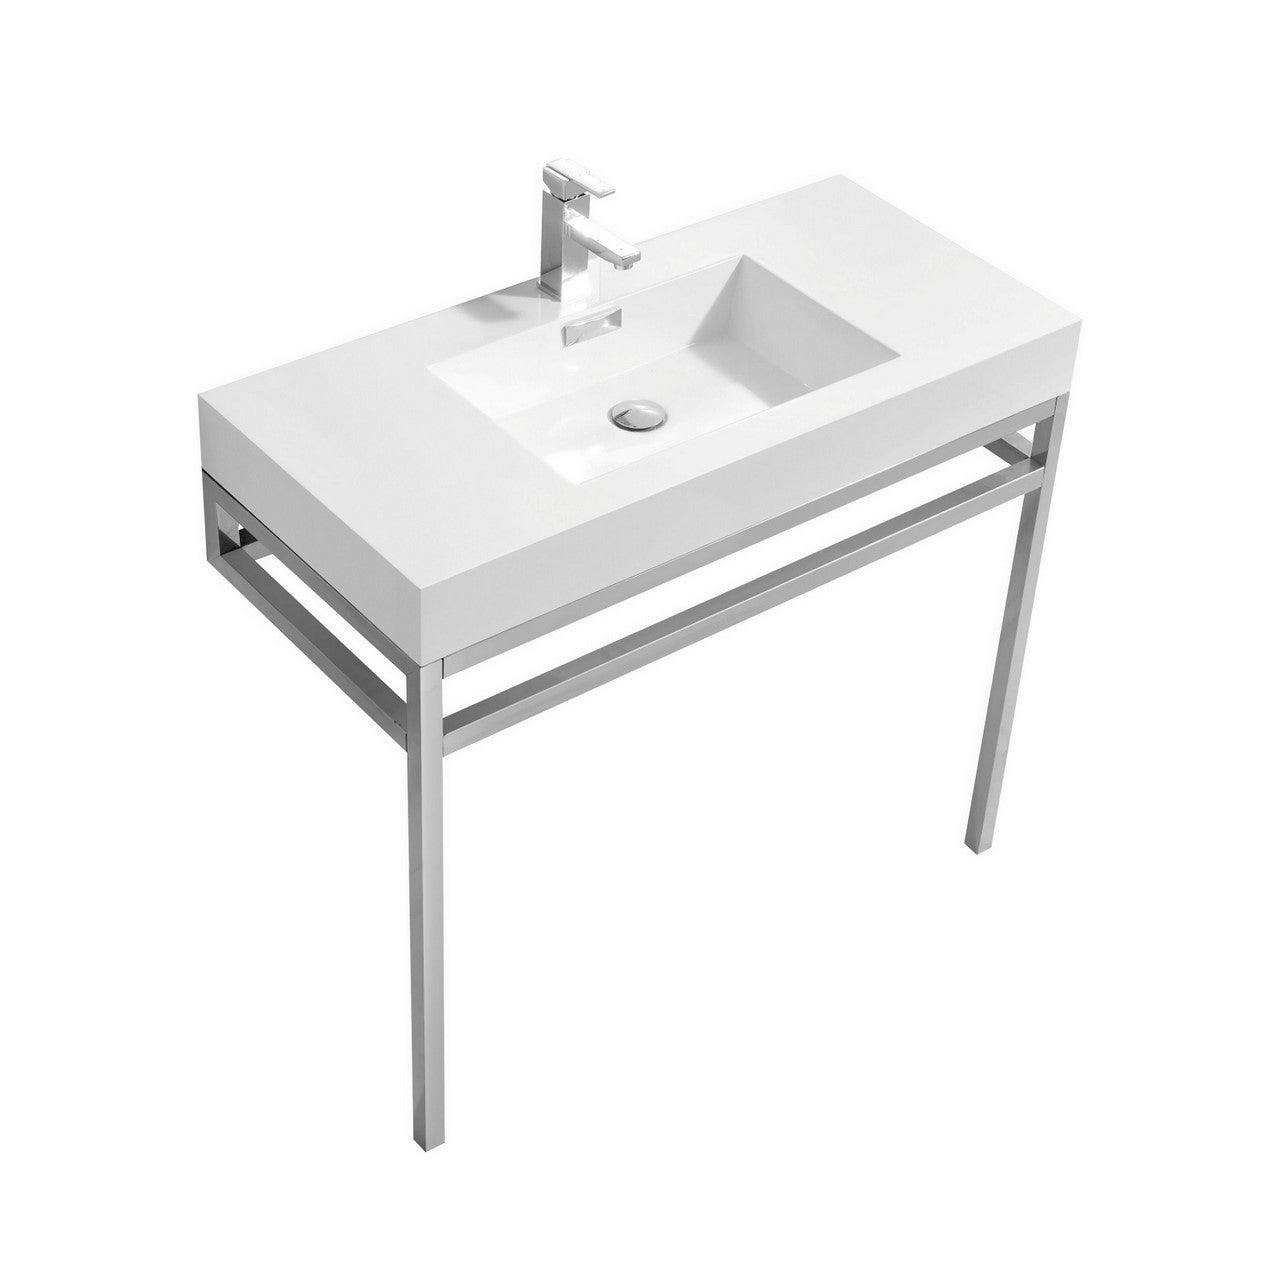 Haus 40″ Inch Stainless Steel Console W/ White Acrylic Sink – Chrome